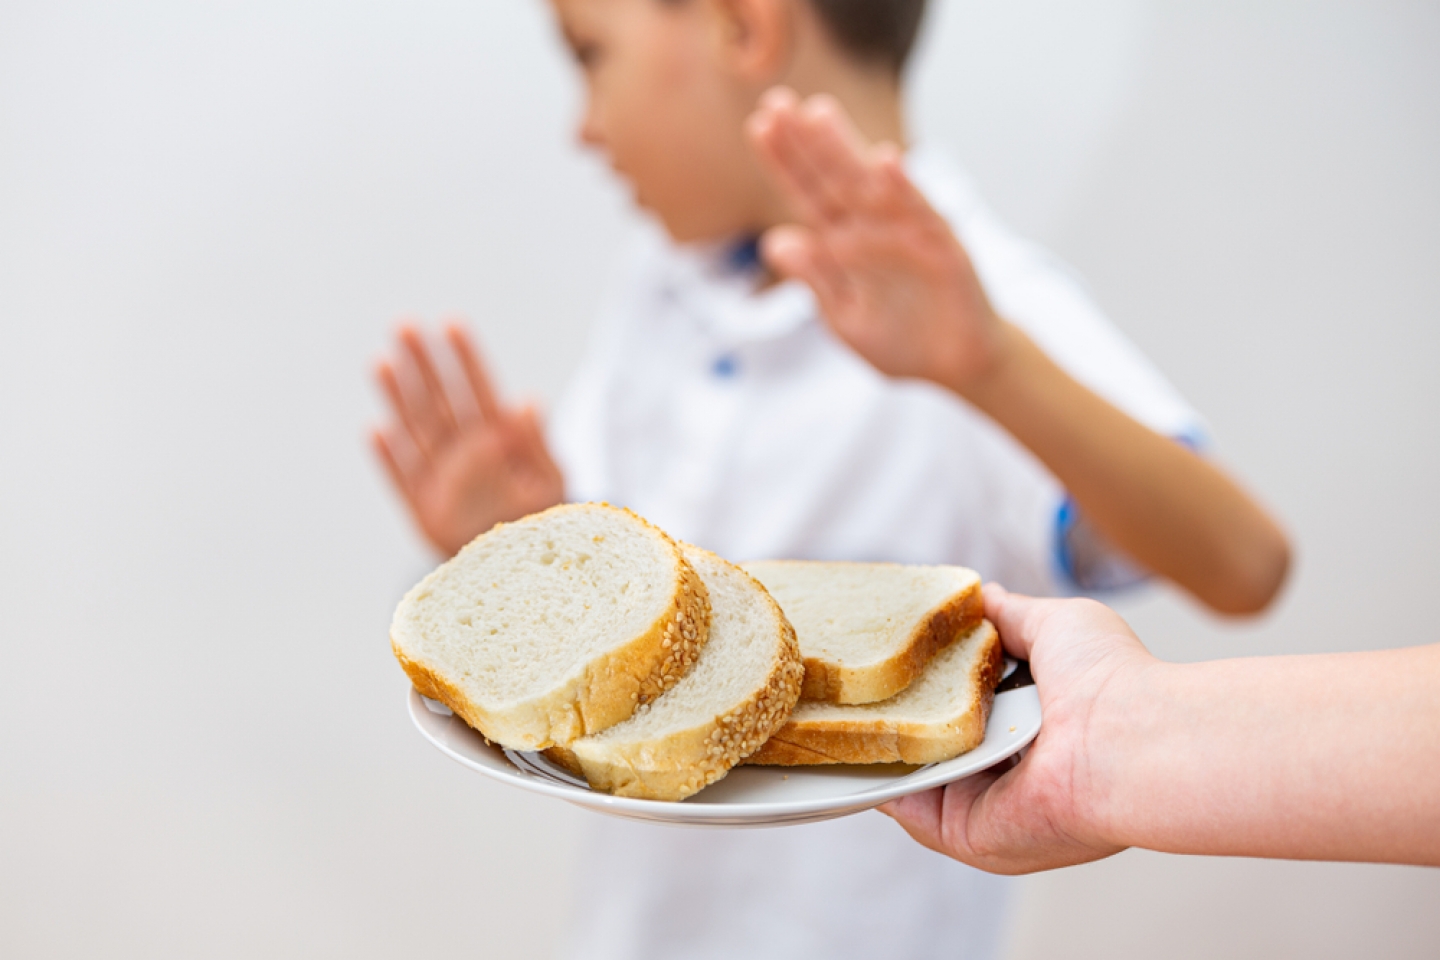 Kid on gluten free diet is saying no thanks to toast.